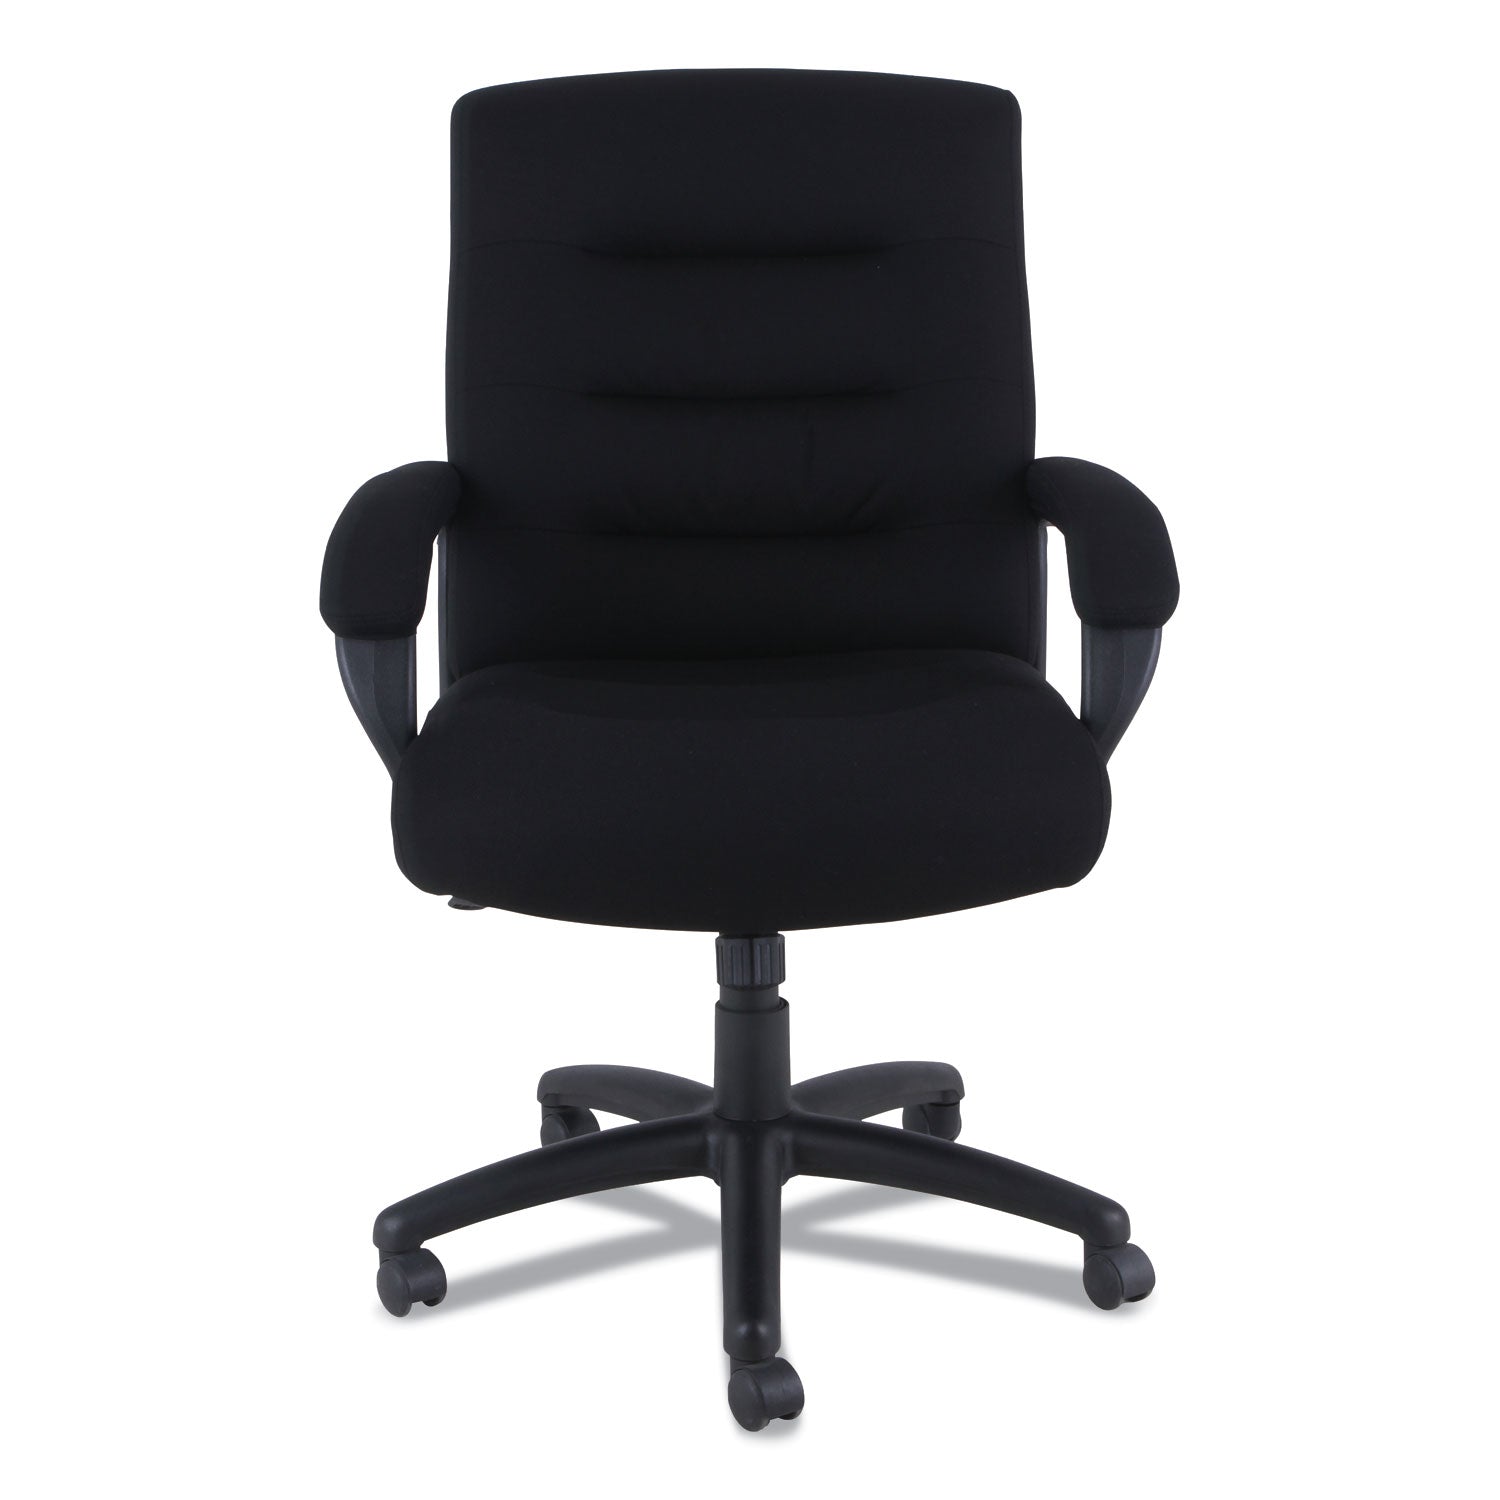 alera-kesson-series-mid-back-office-chair-supports-up-to-300-lb-1803-to-2177-seat-height-black_aleks4210 - 2